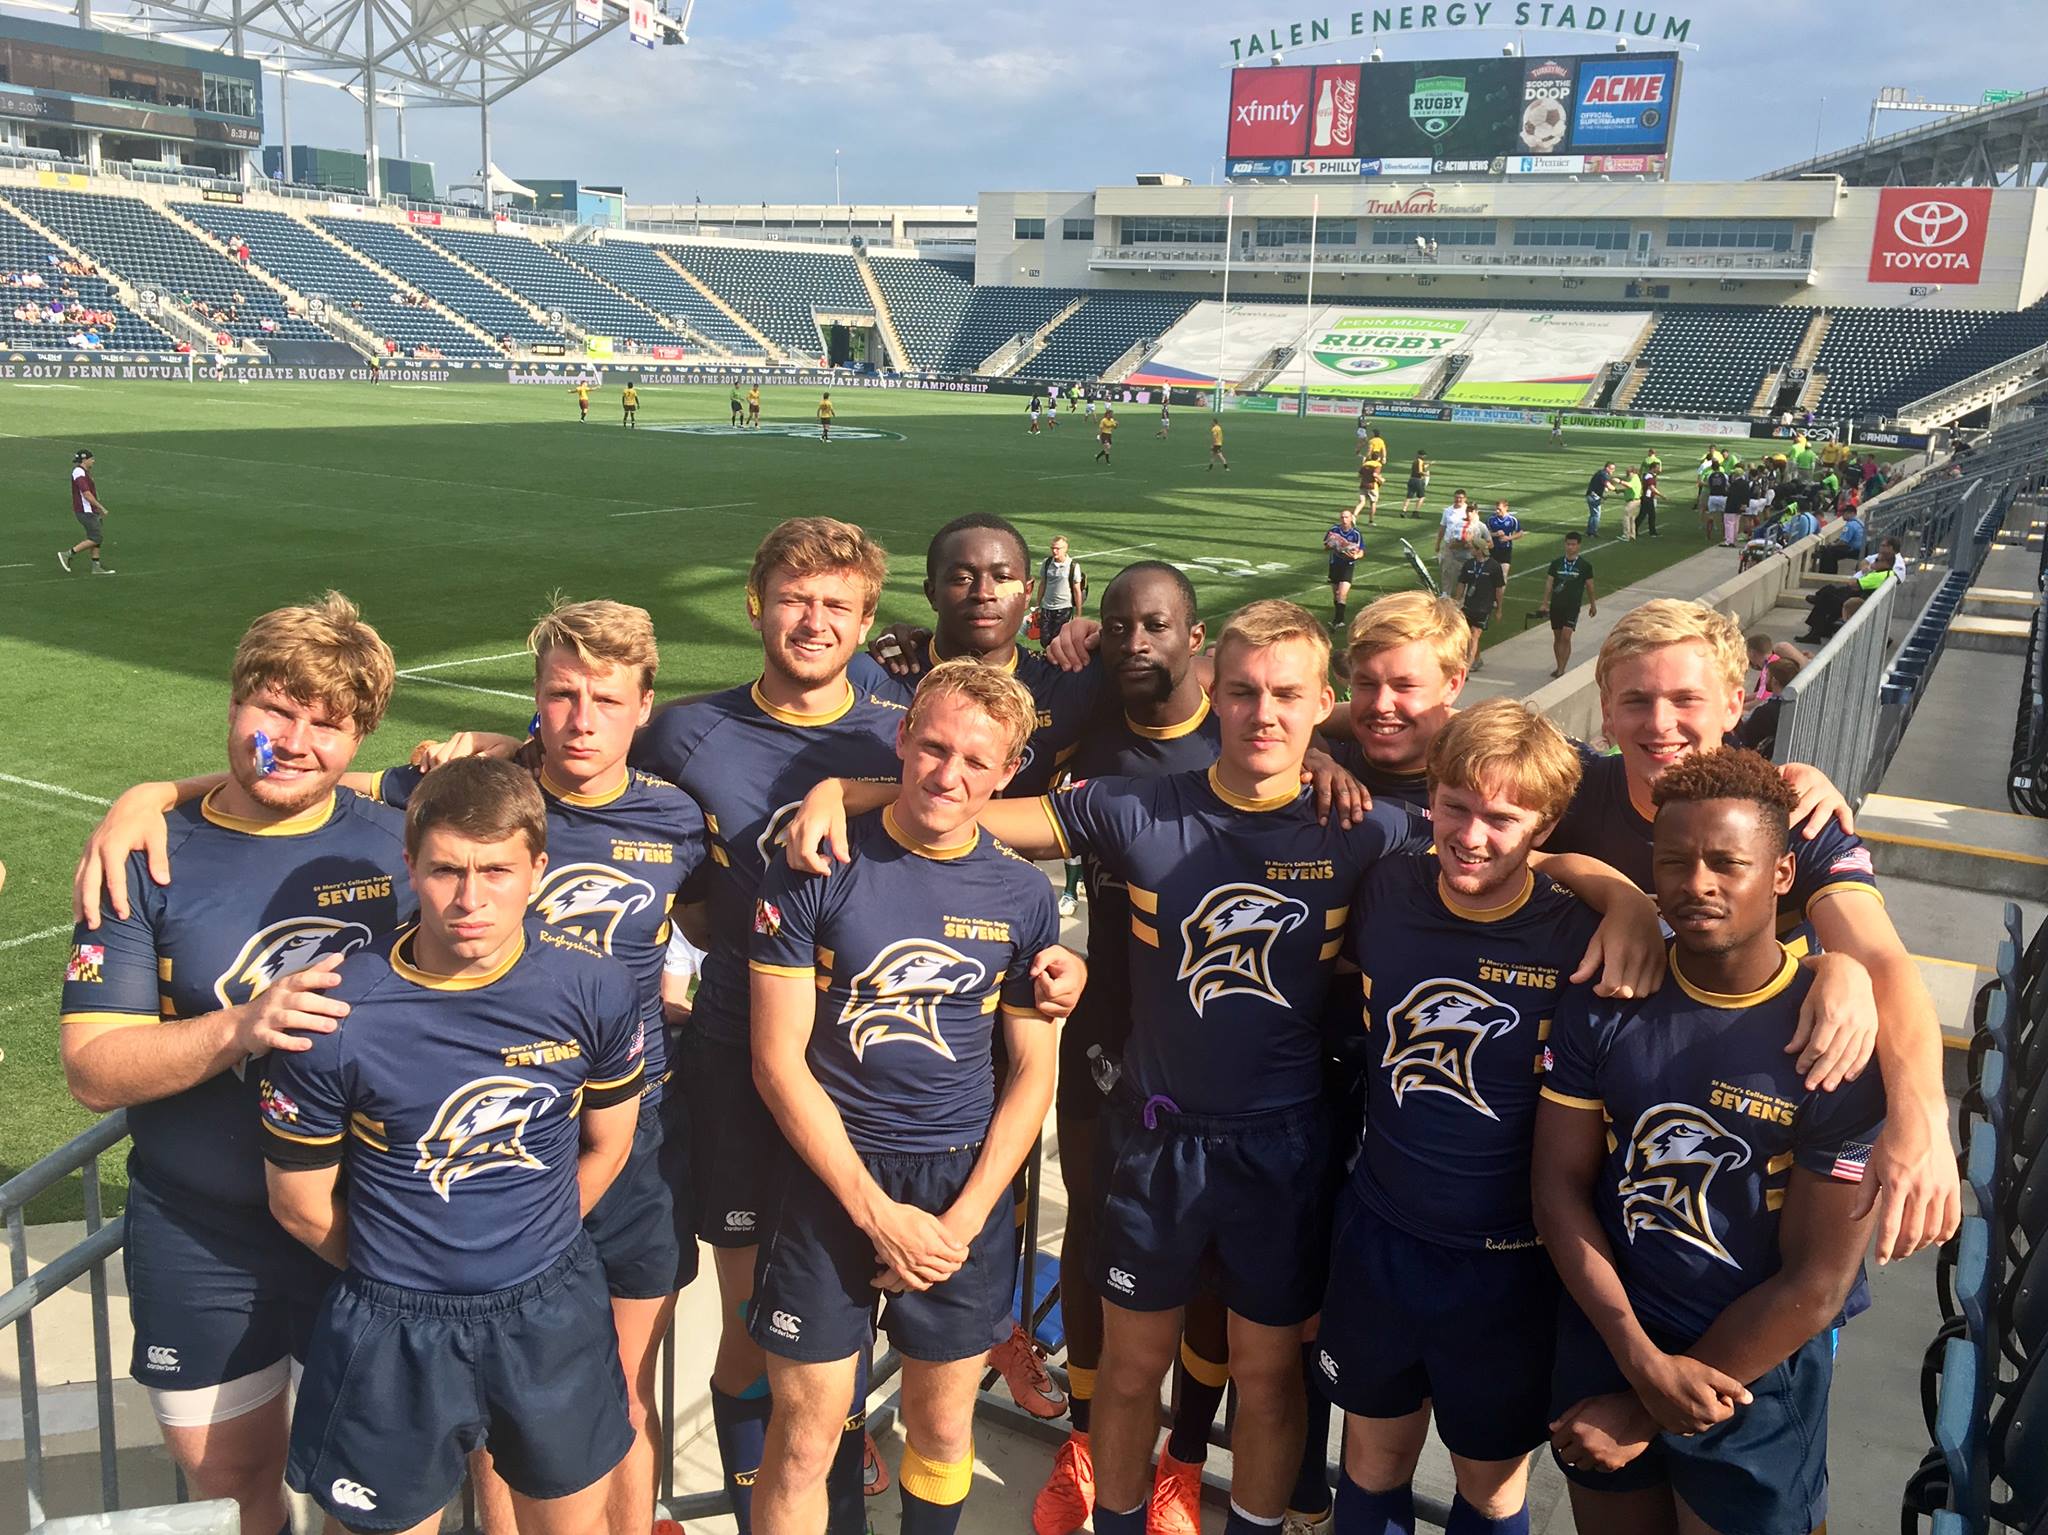 St. Mary's College men's rugby team poses for a picture in a large football stadium.